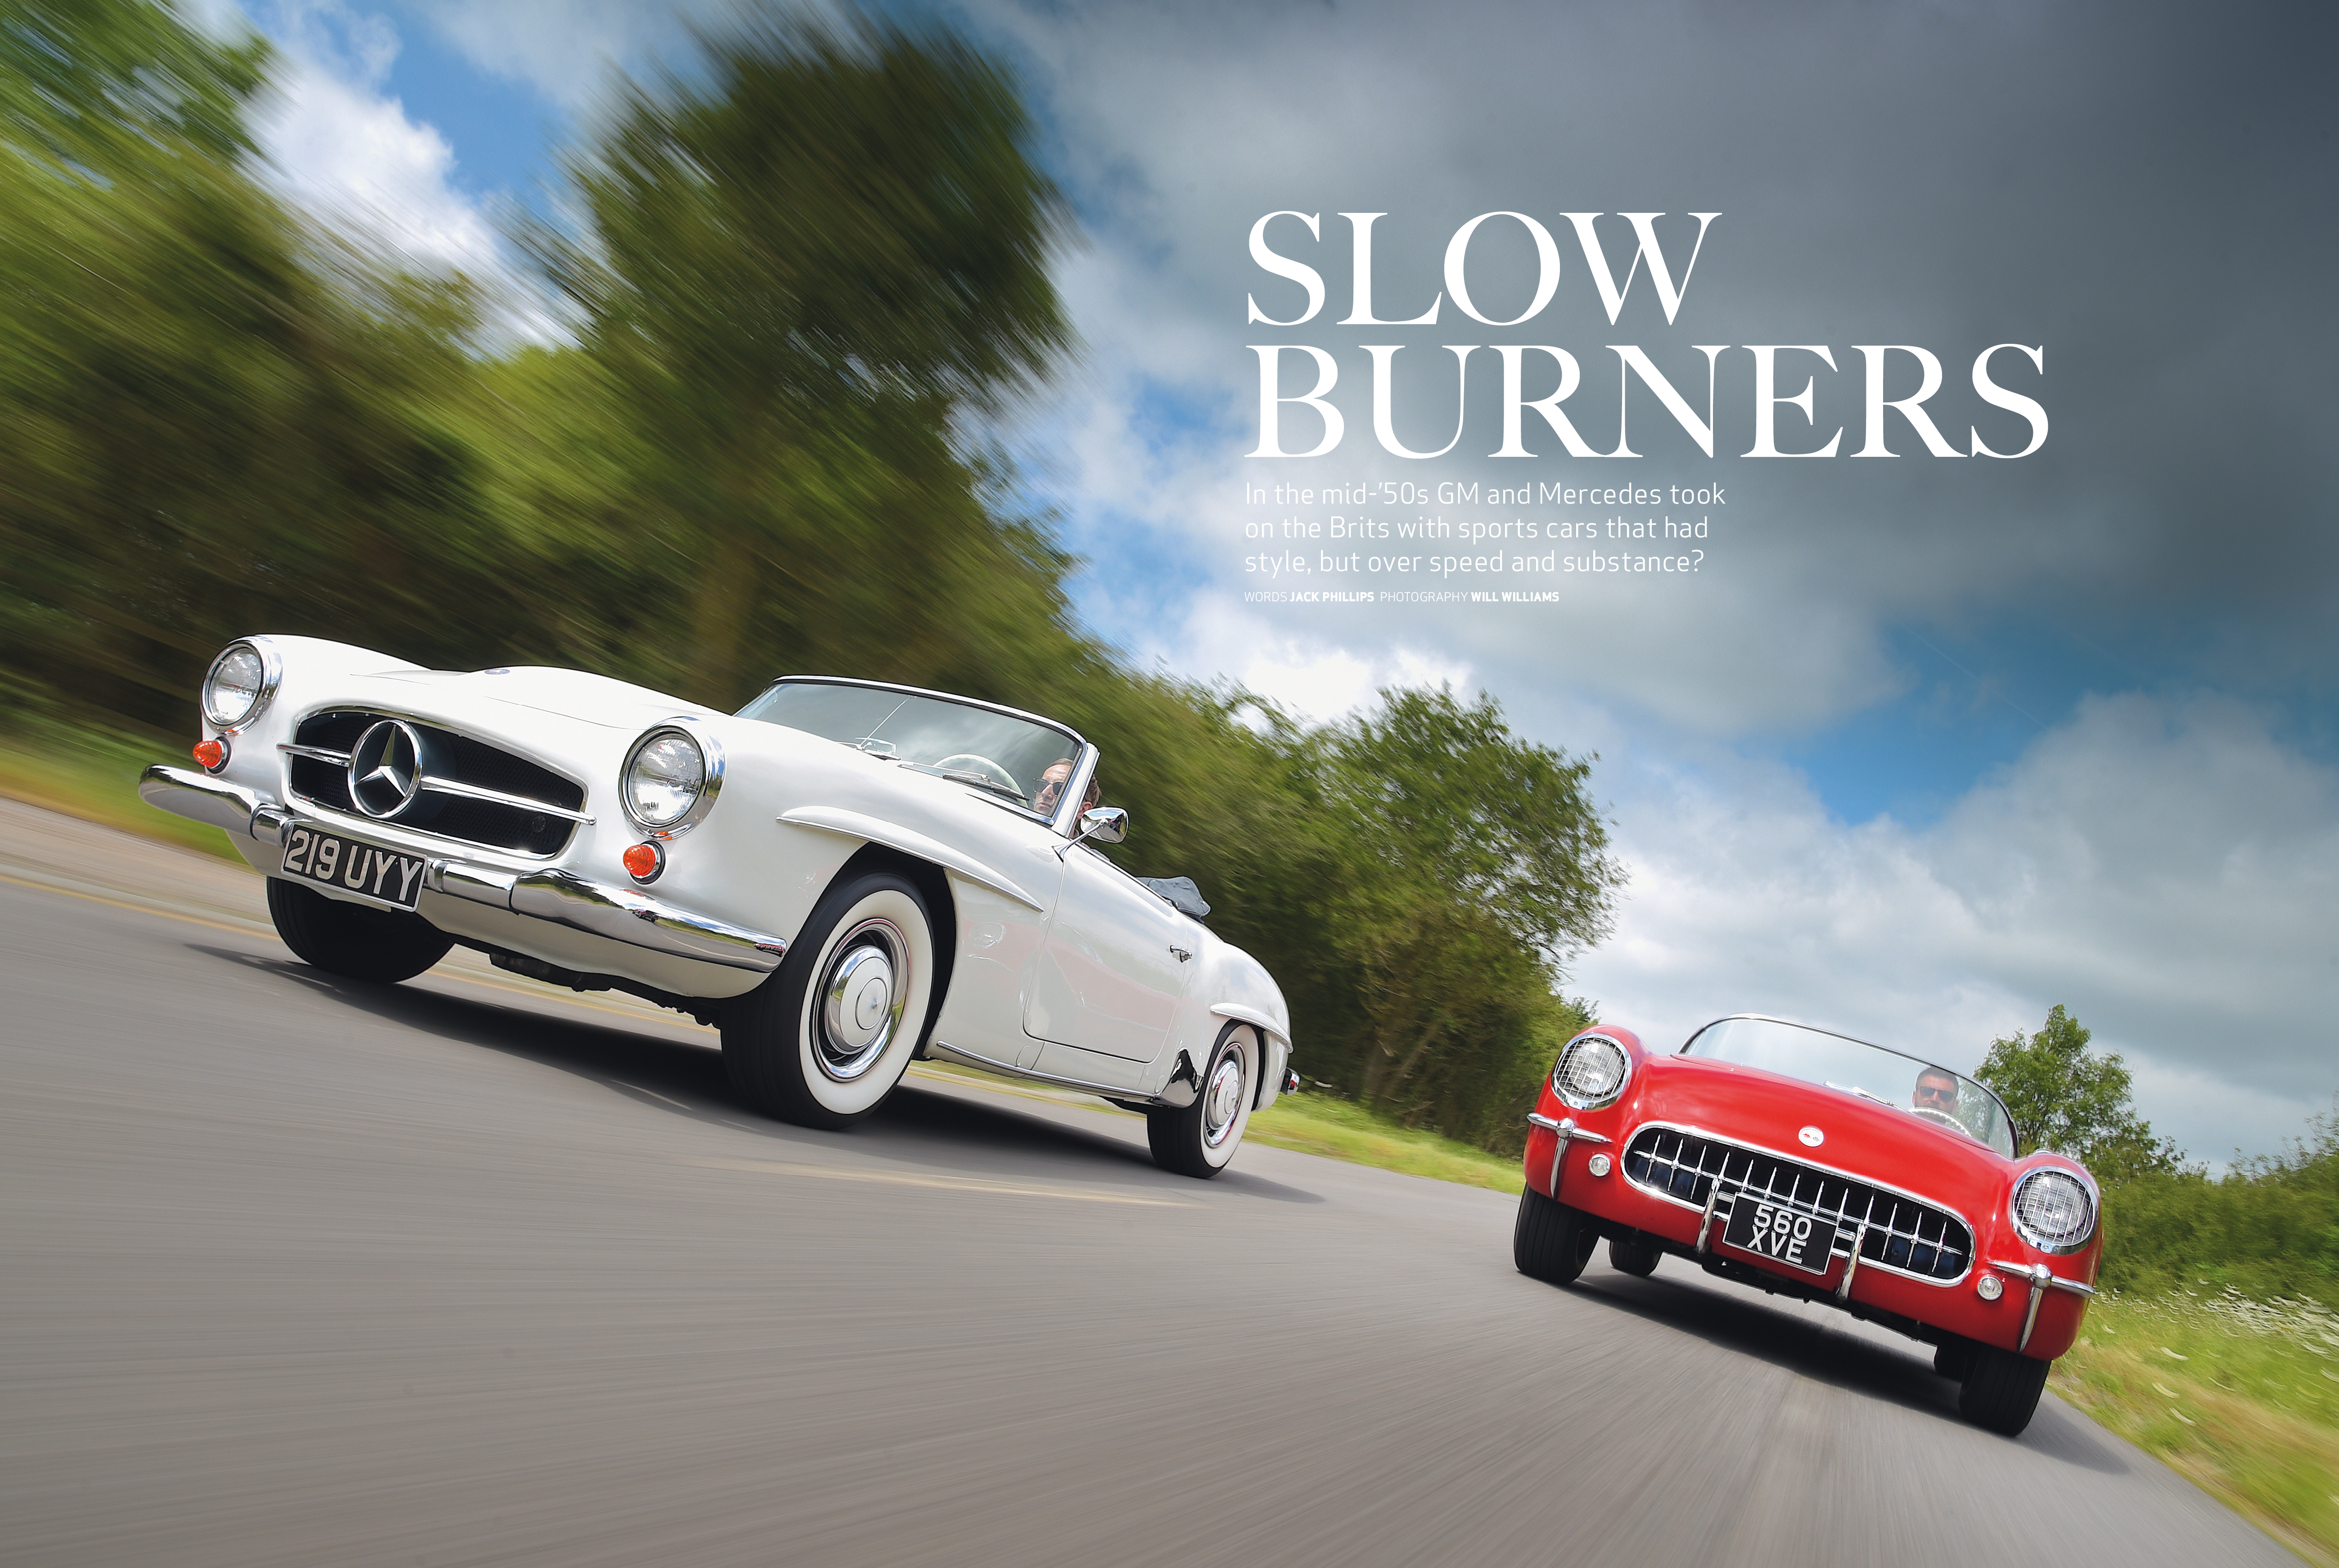 Classic & Sports Car – The forgotten baby Ferrari: Inside the August 2019 issue of C&SC